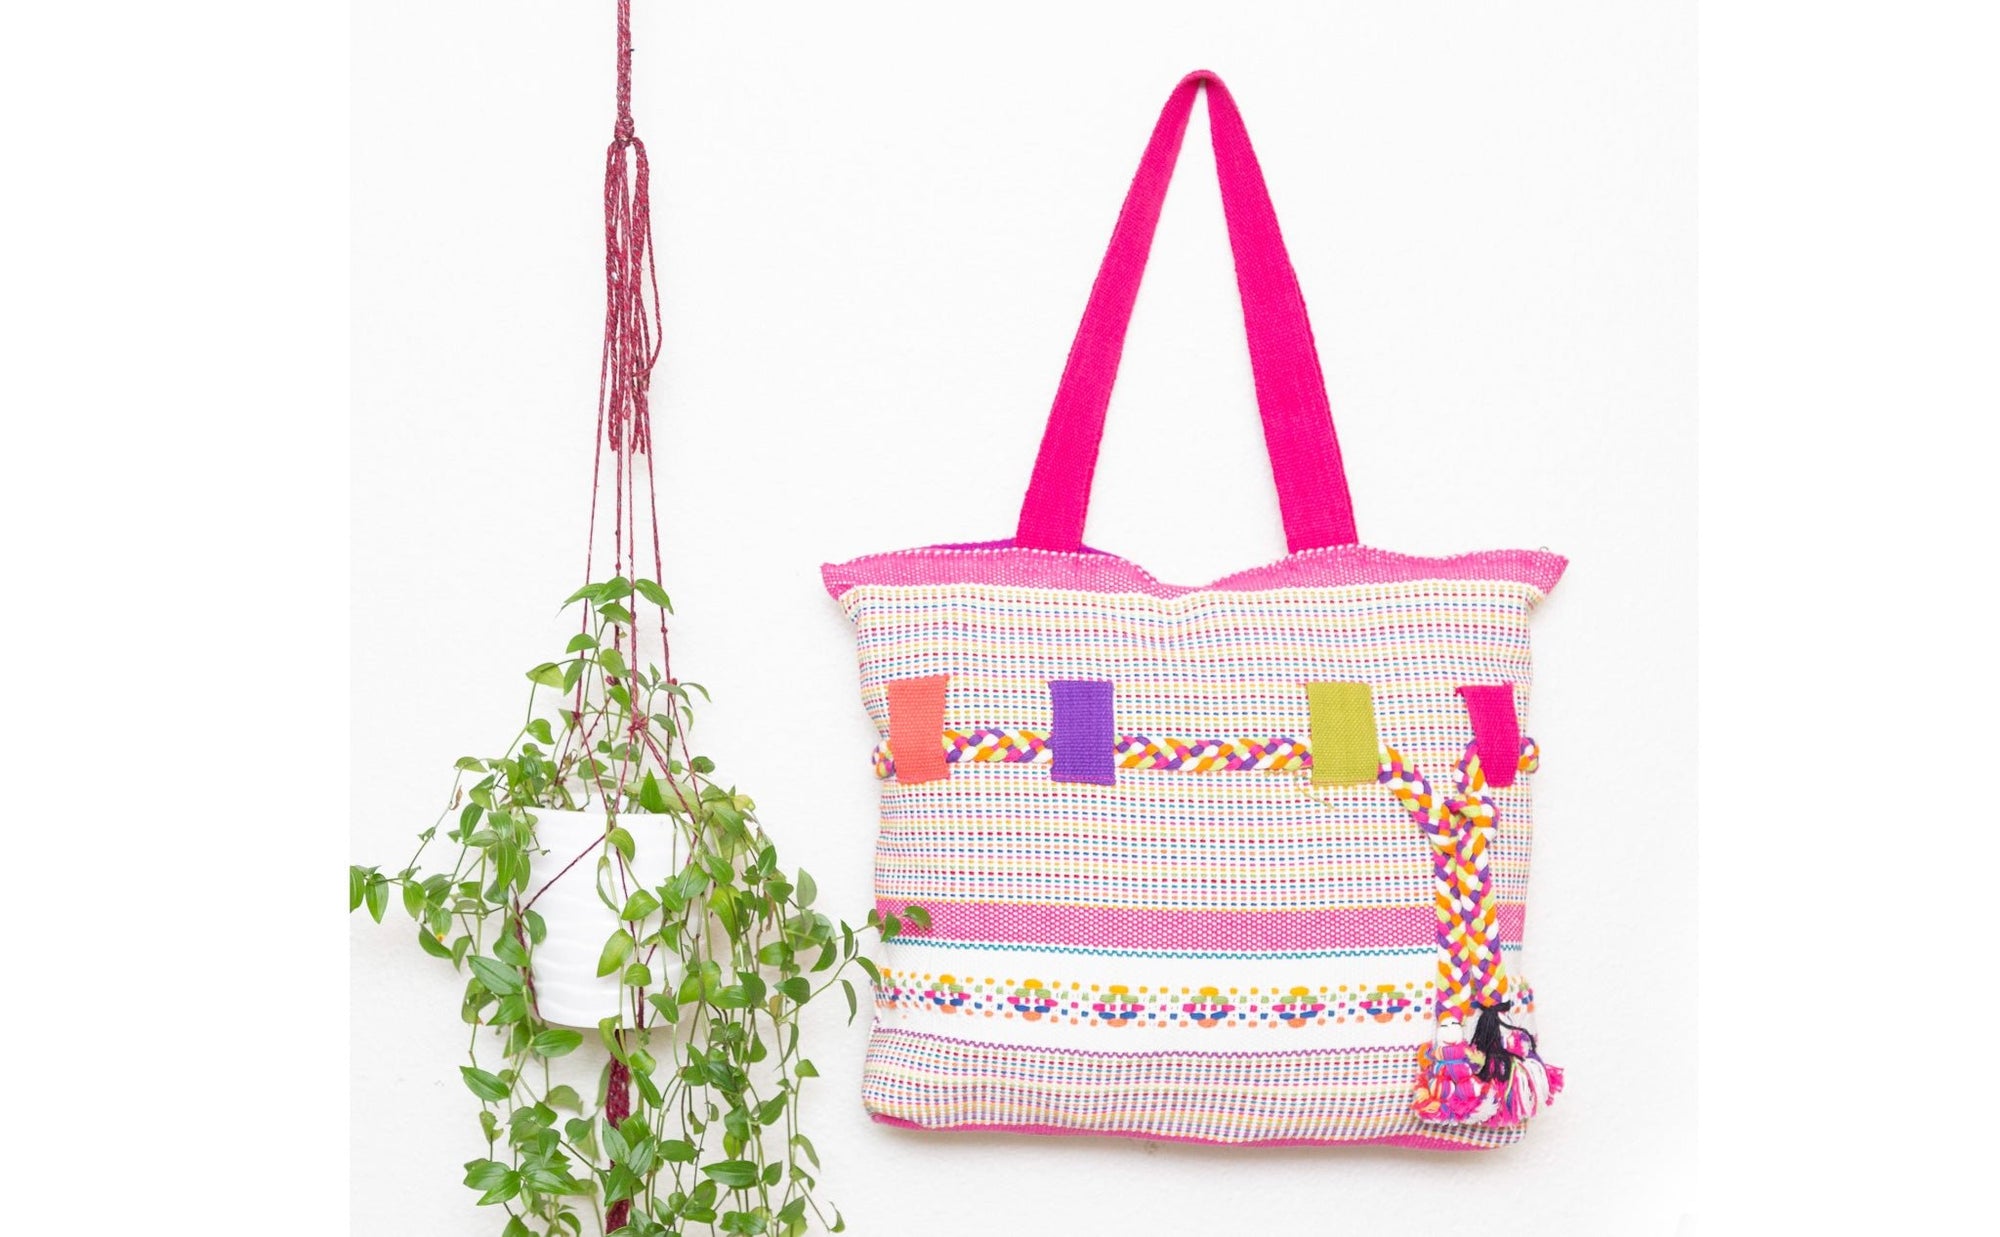 Woven Mexican Tote Bag - Alternatives Global Marketplace